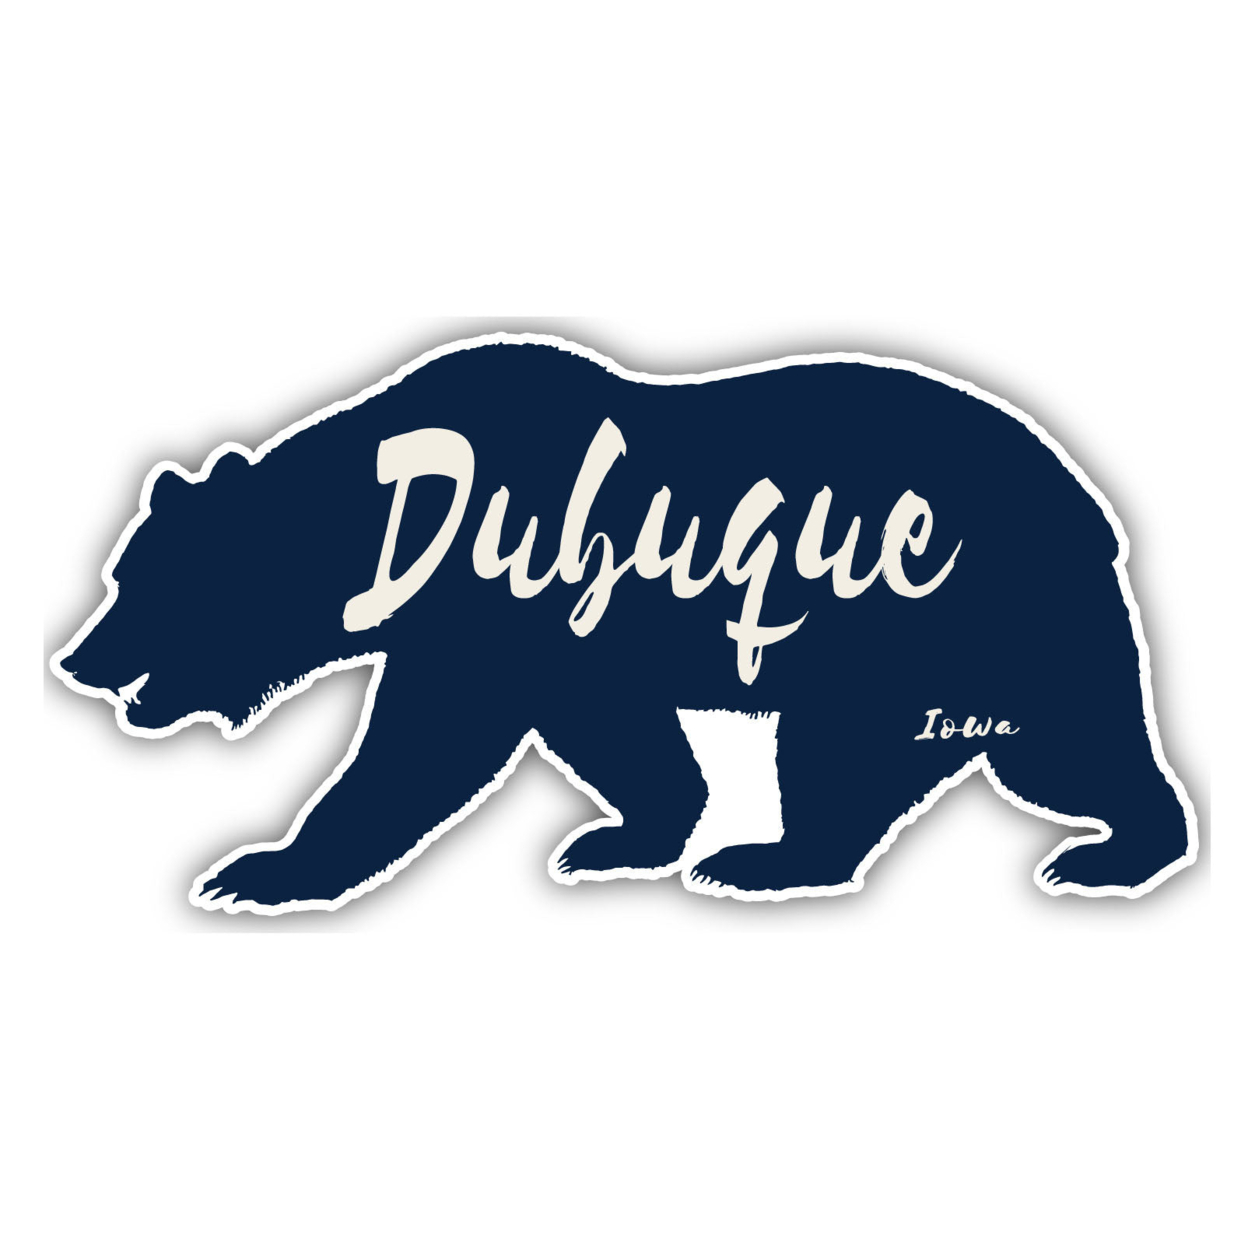 Dubuque Iowa Souvenir Decorative Stickers (Choose Theme And Size) - 4-Pack, 12-Inch, Great Outdoors